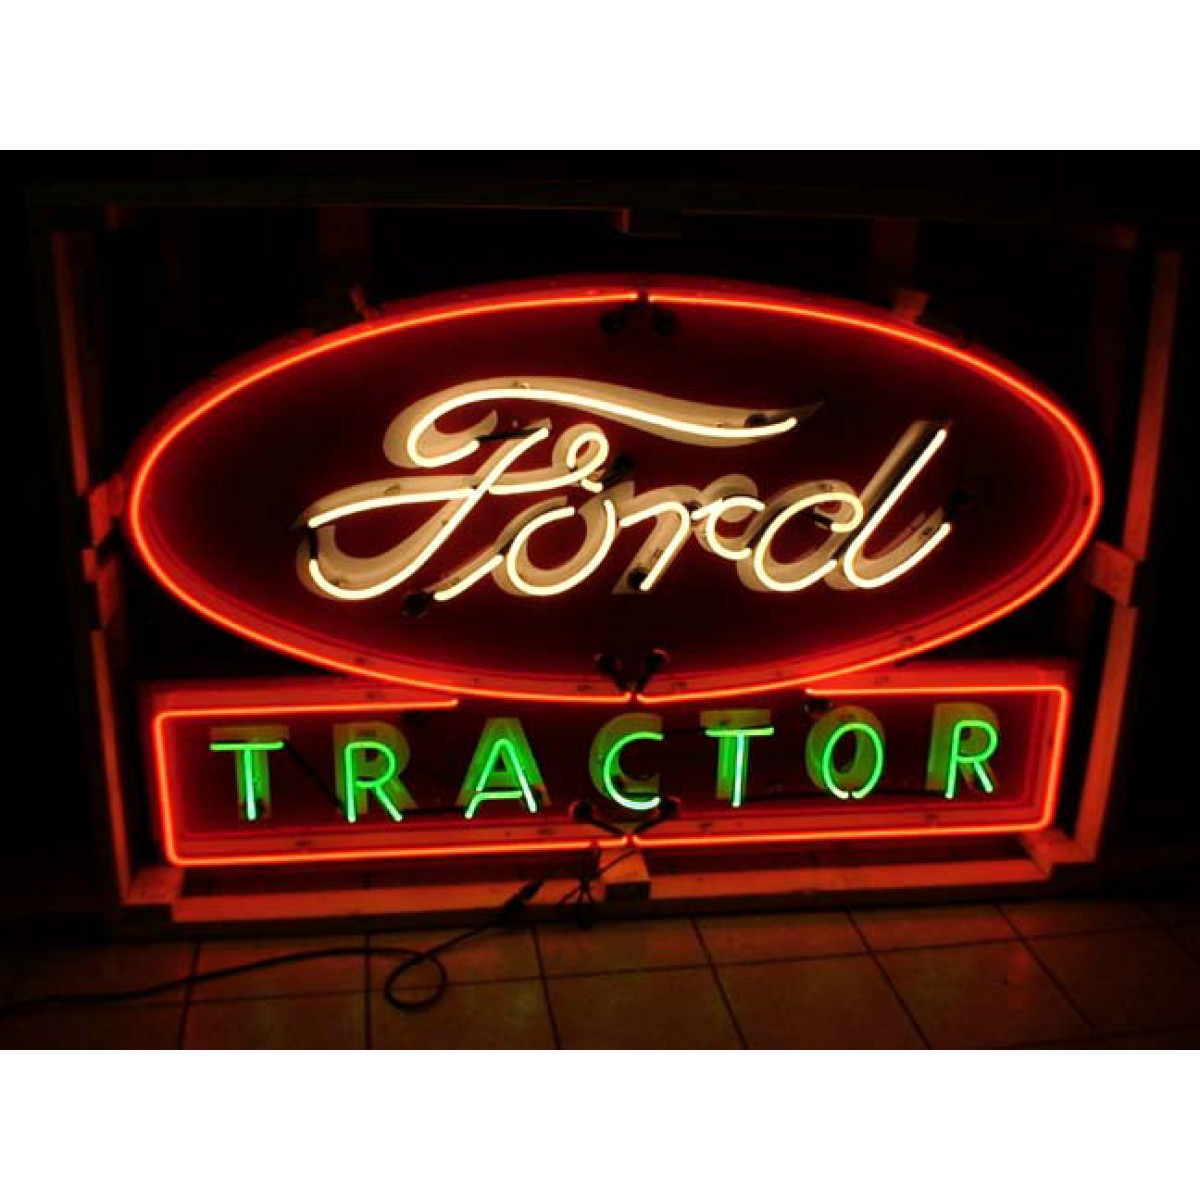 Ford tractor porcelain sign #1